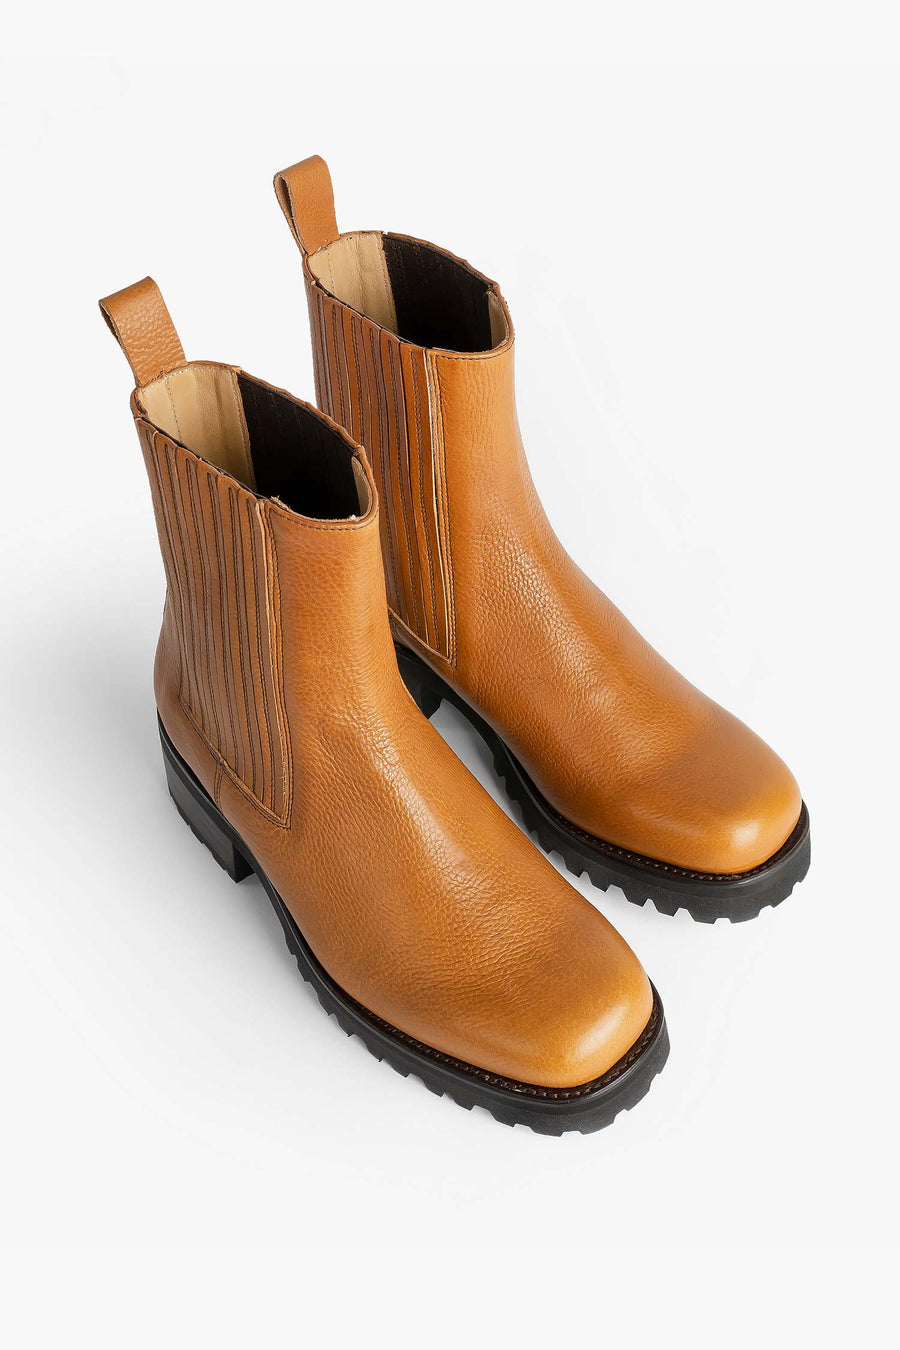 Sustainable, goodyear-welted leather boot made from vegetable tanned leather. Made in Spain. 